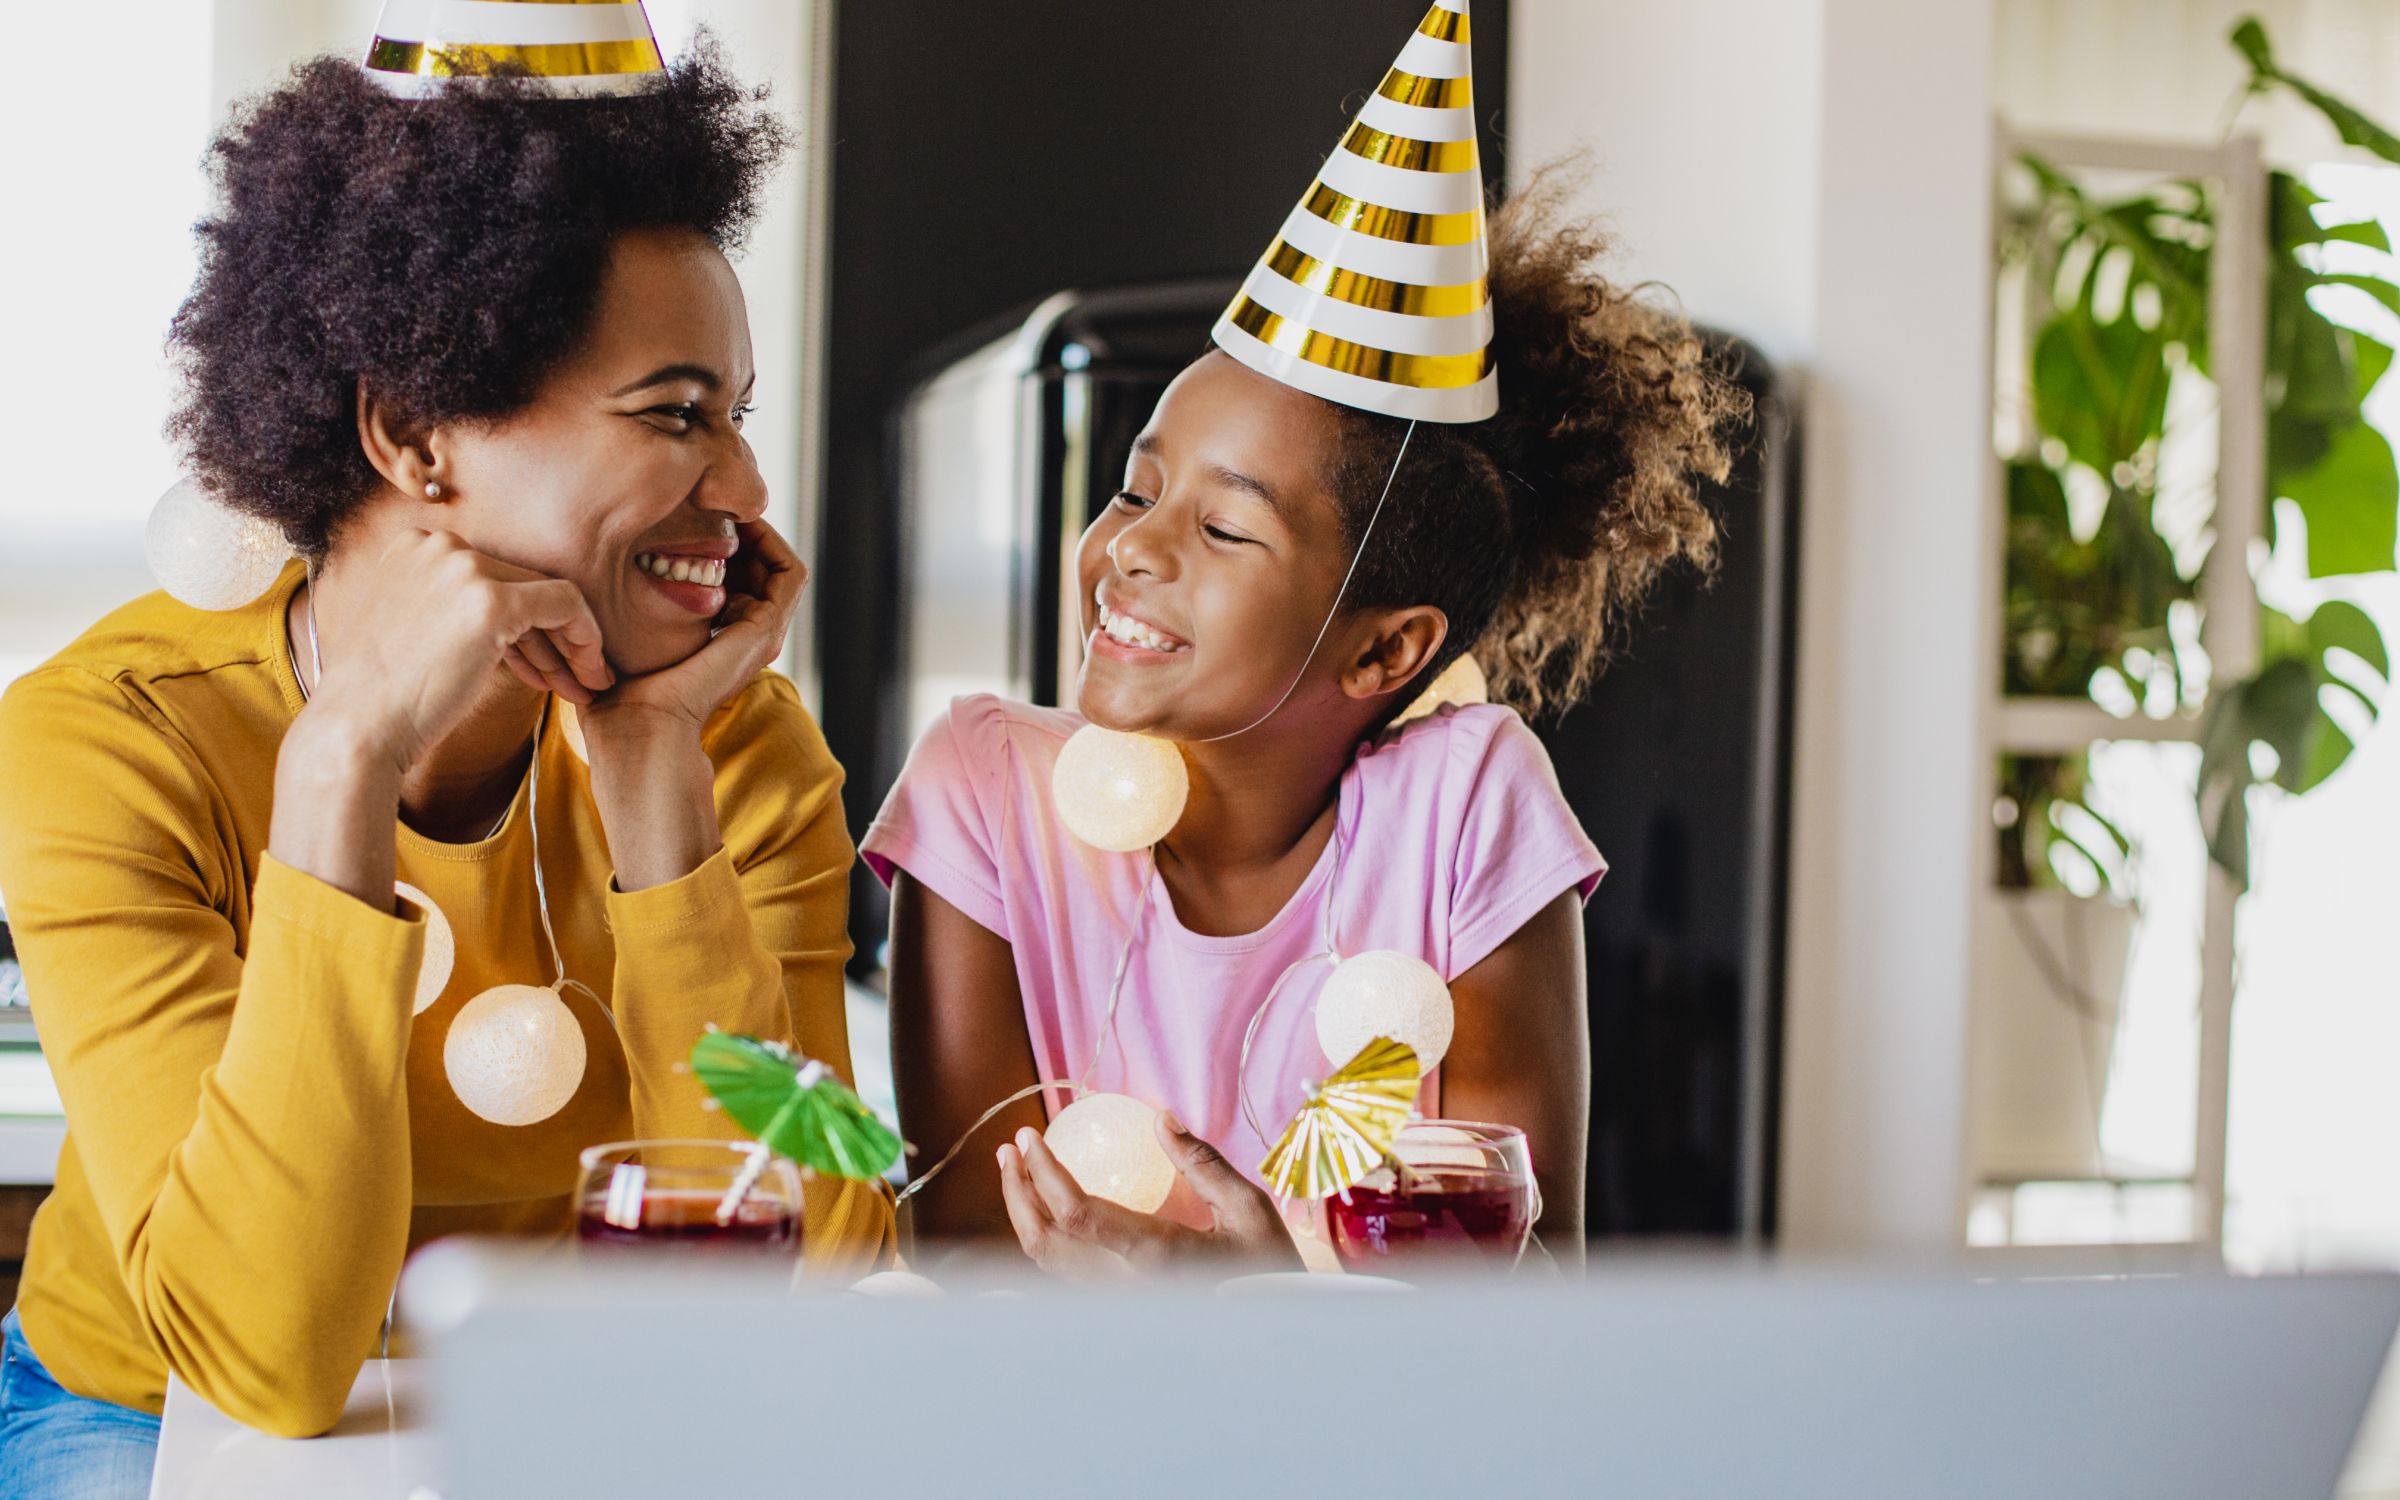 Mother and daughter enjoying an online birthday party